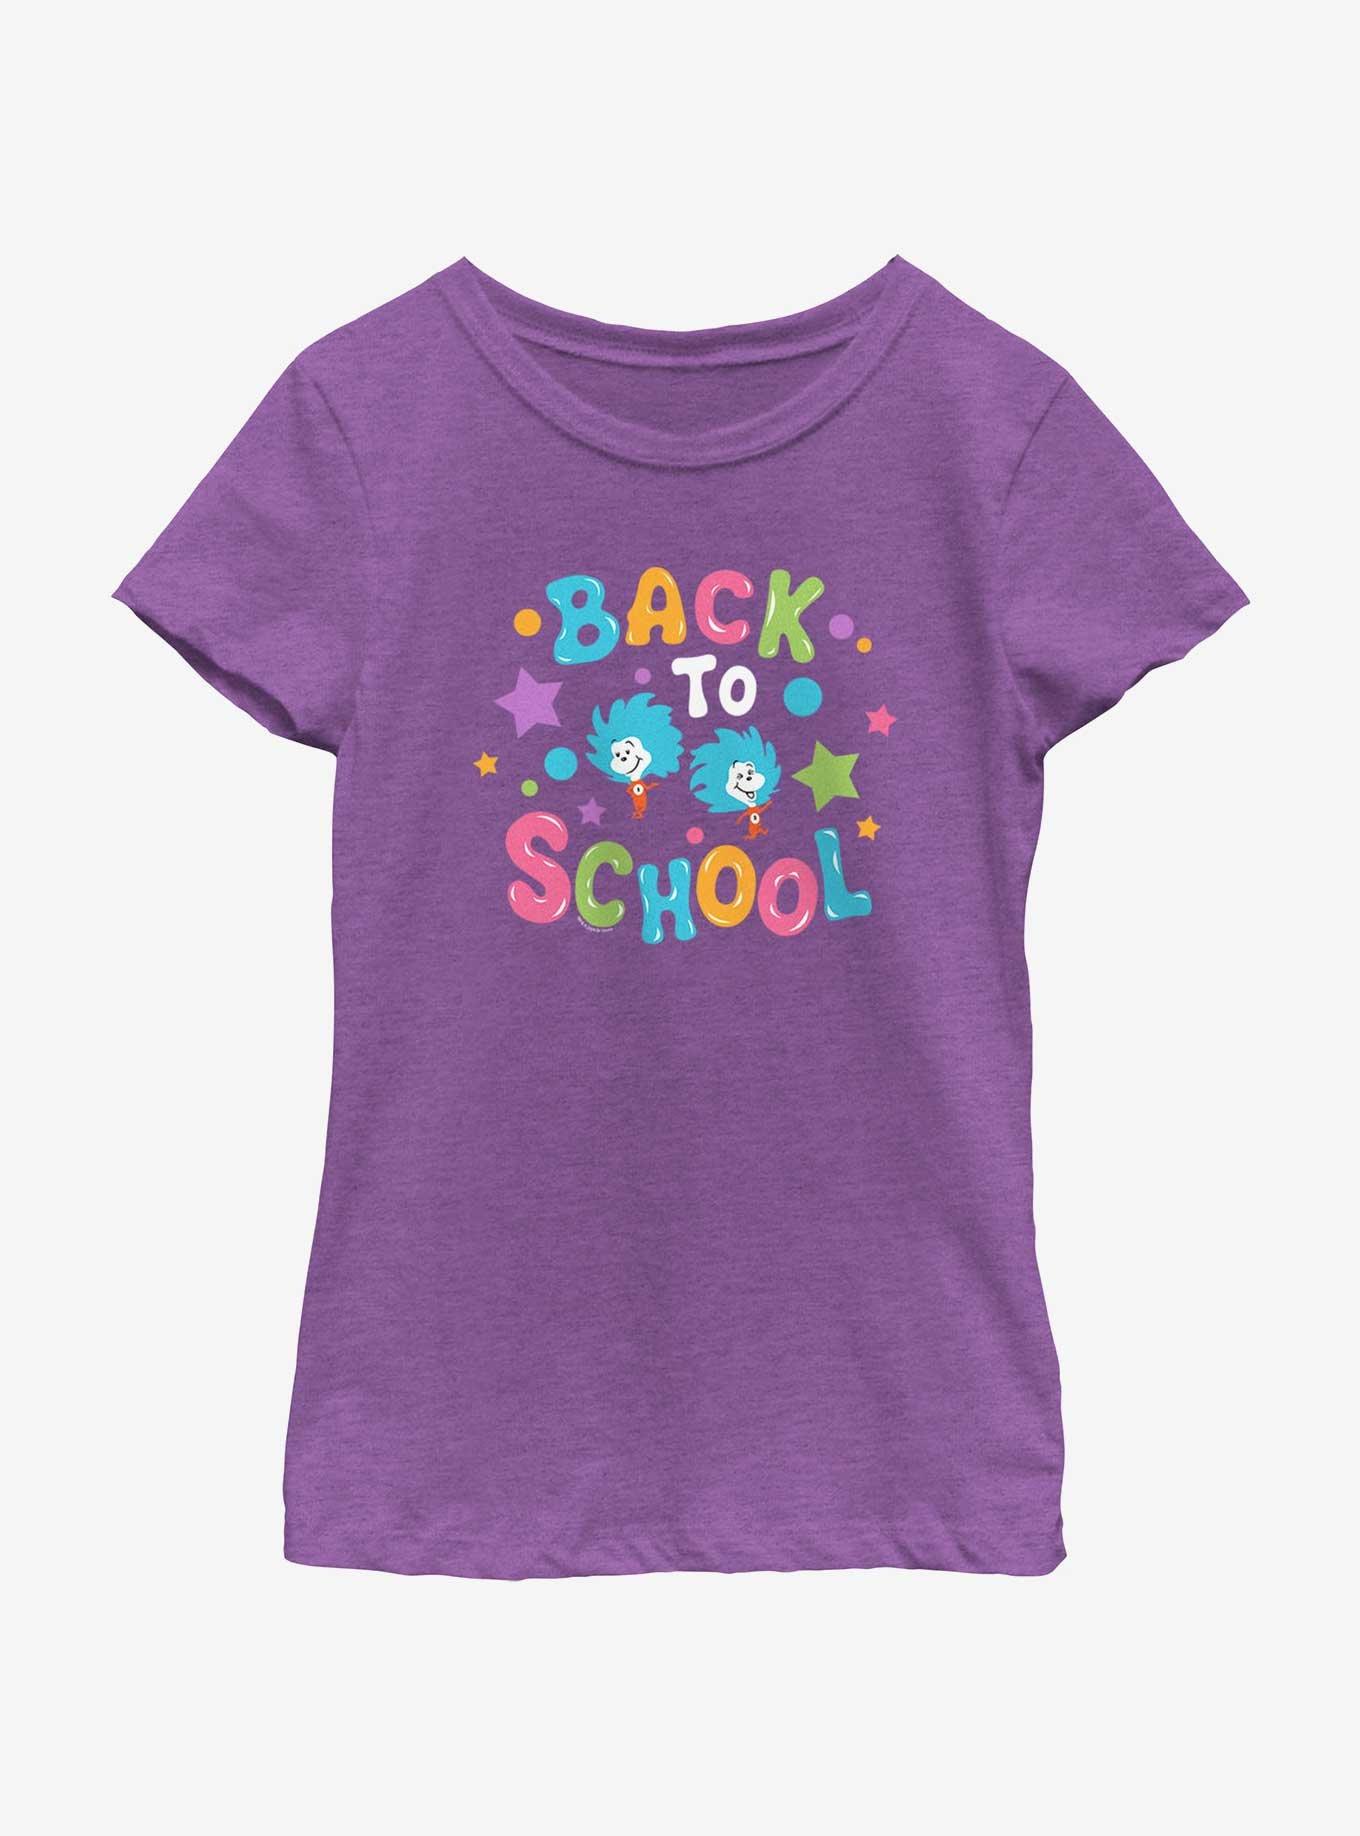 Dr. Seuss School Thing Two Youth Girls T-Shirt, PURPLE BERRY, hi-res